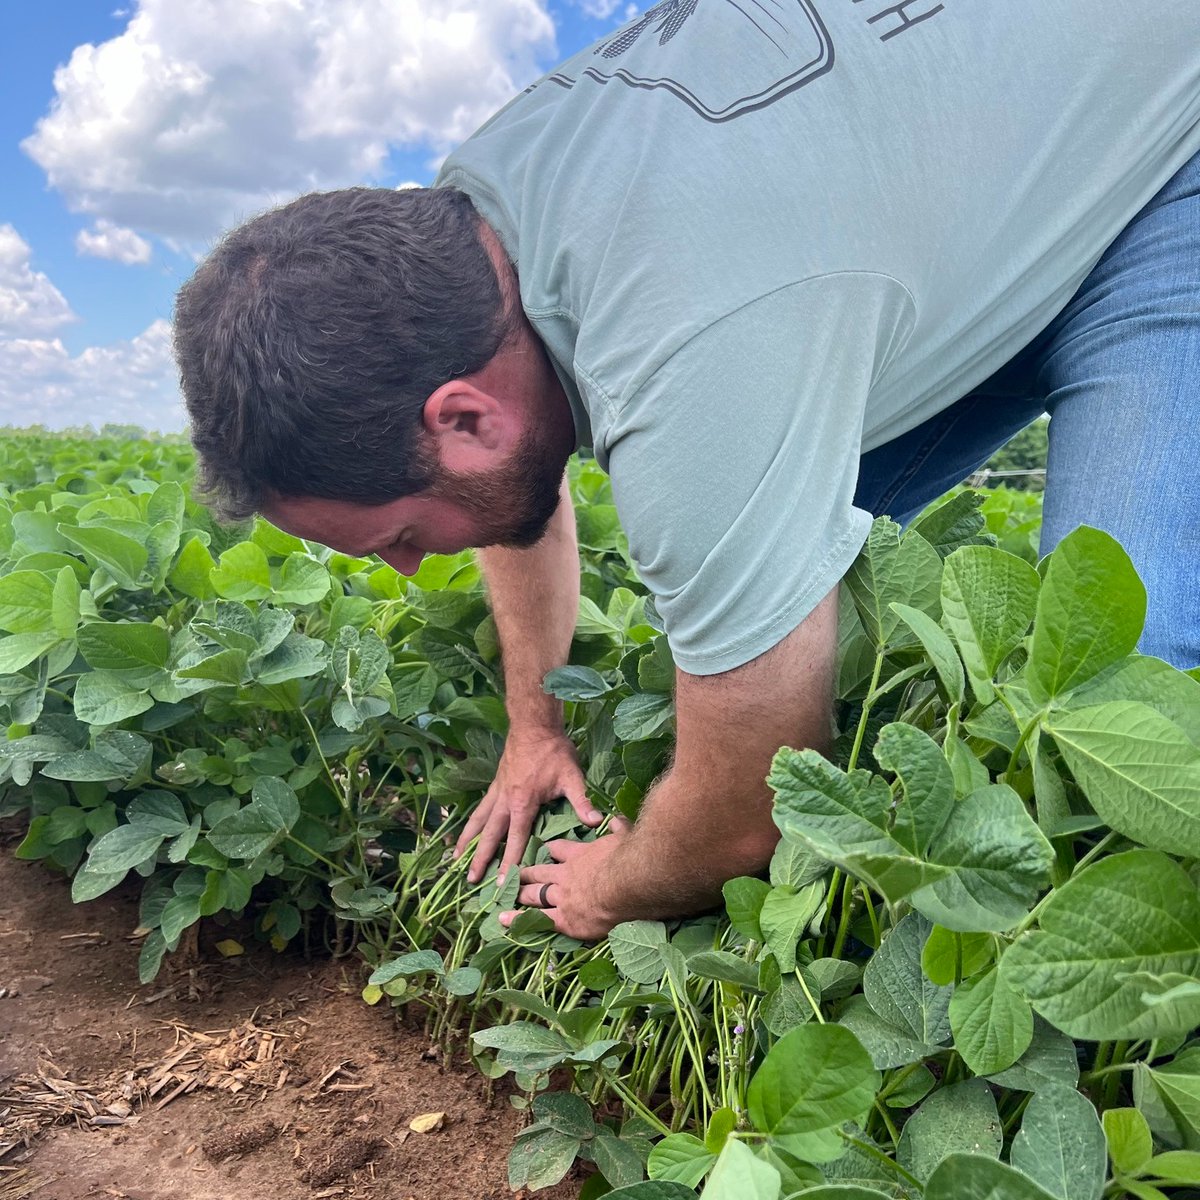 We had the pleasure of visiting @AlexHarrell21 at his farm in Georgia last week. We scouted fields, showcased his use of drone technology, shared insights about this year's growing season and how we can work together to push production limits. Thanks for having us, Alex and for